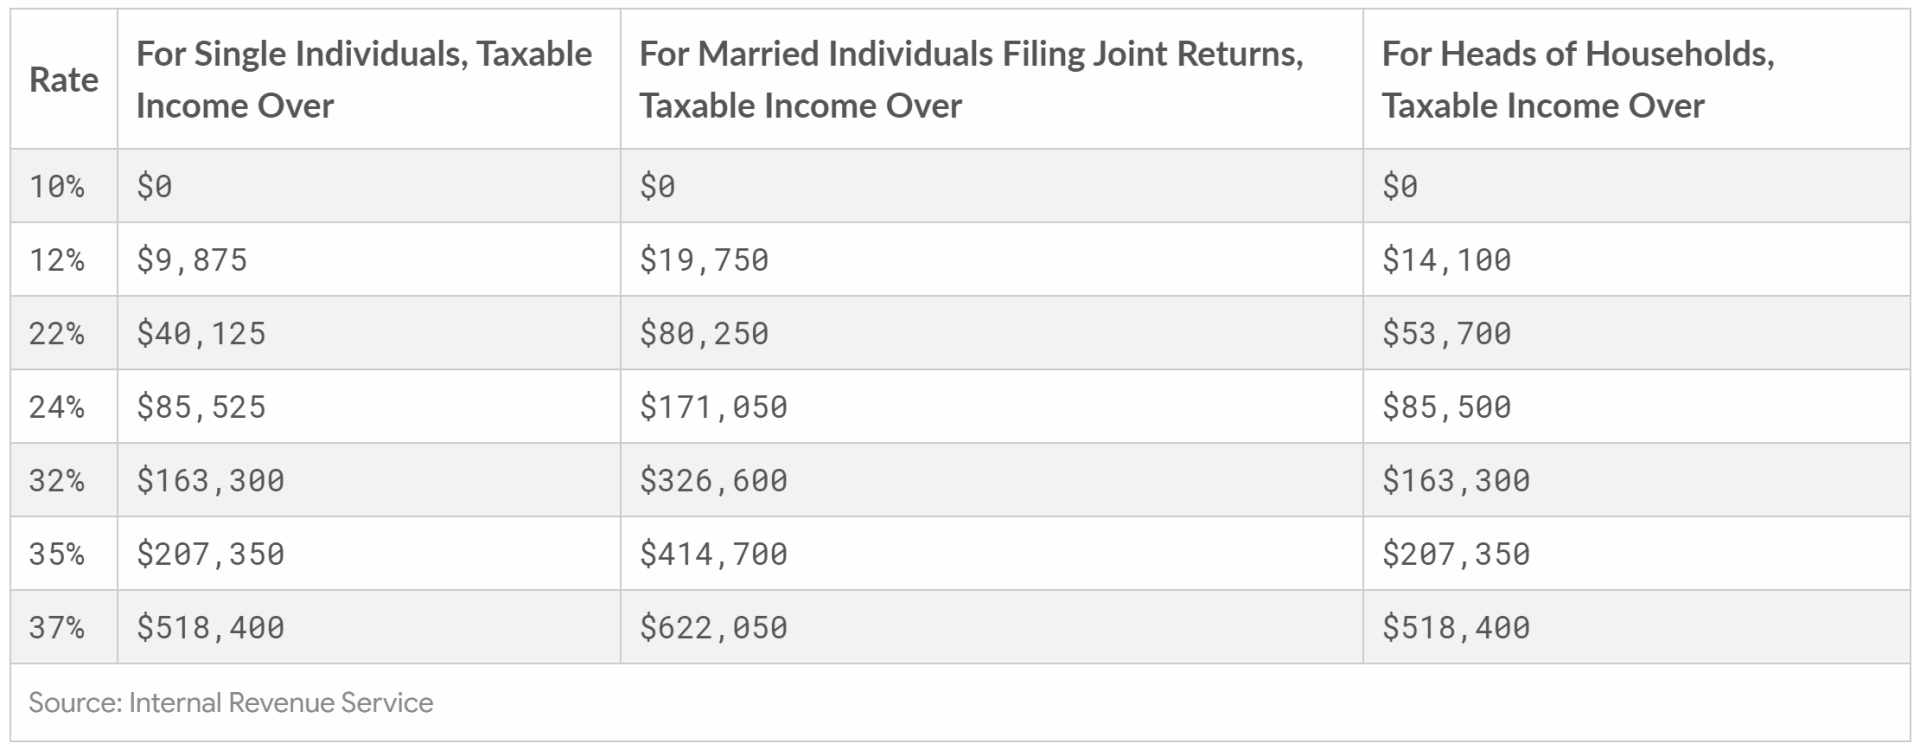 tax brackets and rates